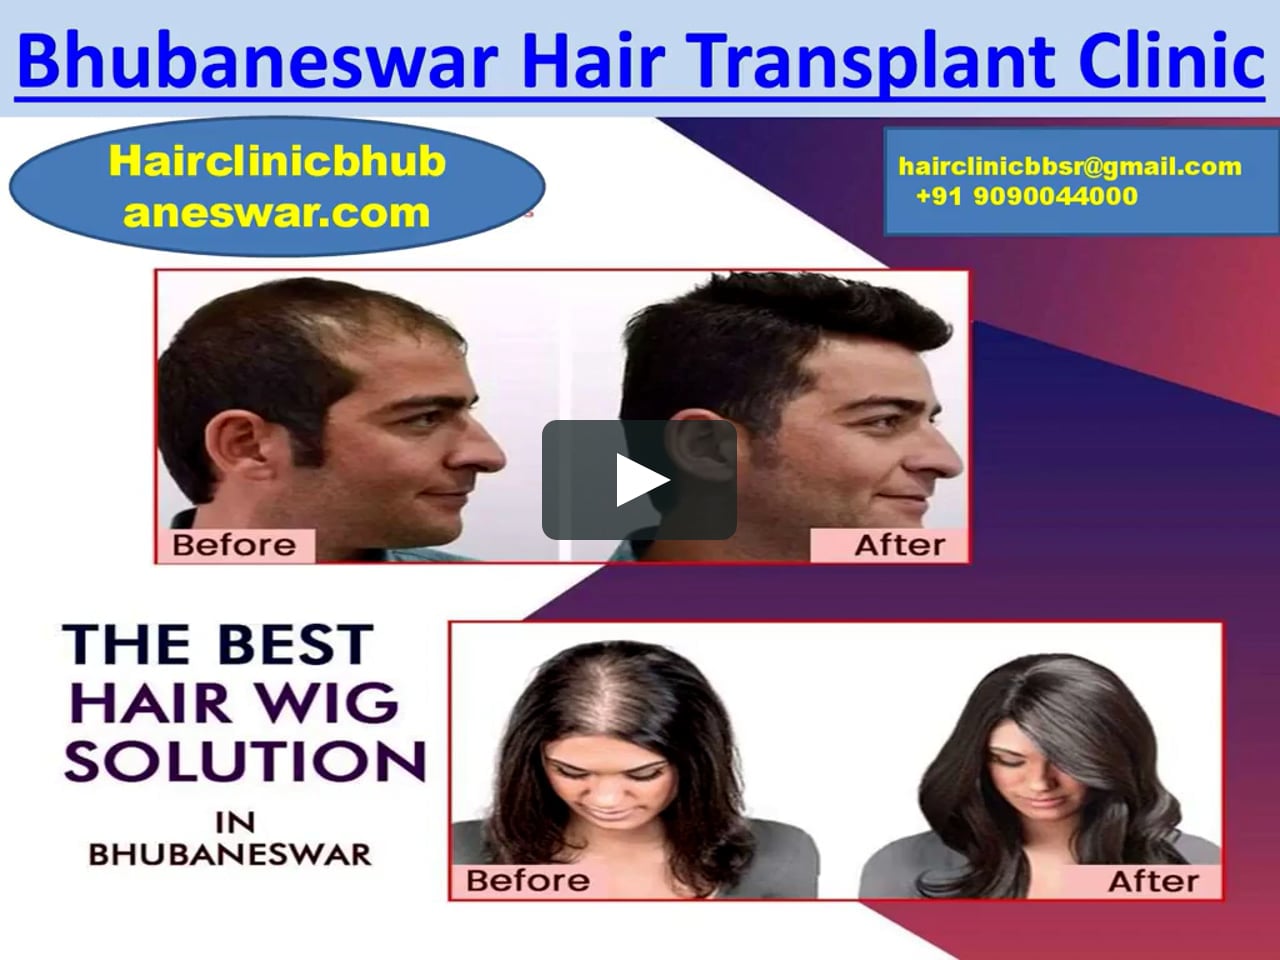 Hair transplant clinic in Bhubaneswar - Hair Doctor in Cuttack on Vimeo